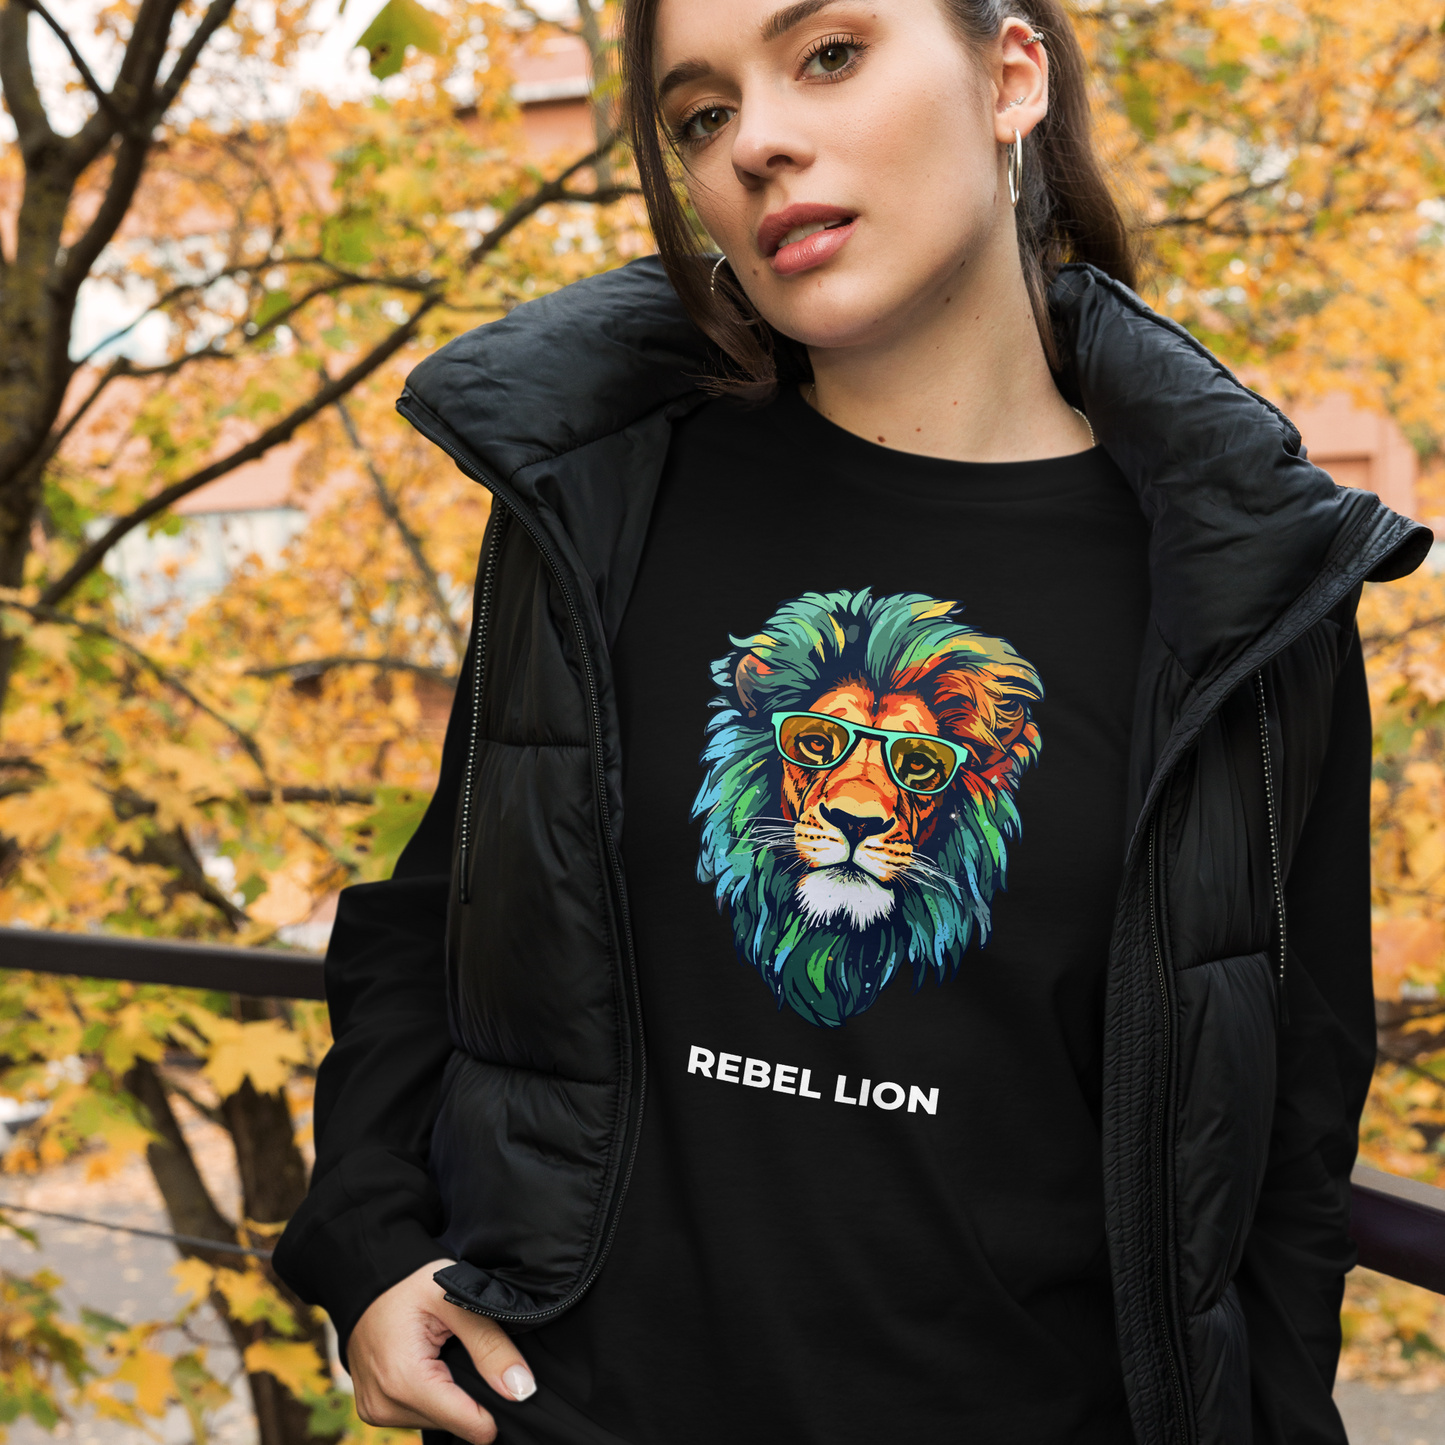 Woman wearing a Black Lion Long Sleeve Tee featuring a bold Rebel Lion graphic on the chest - Cool Lion Long Sleeve Graphic Tees - Boozy Fox